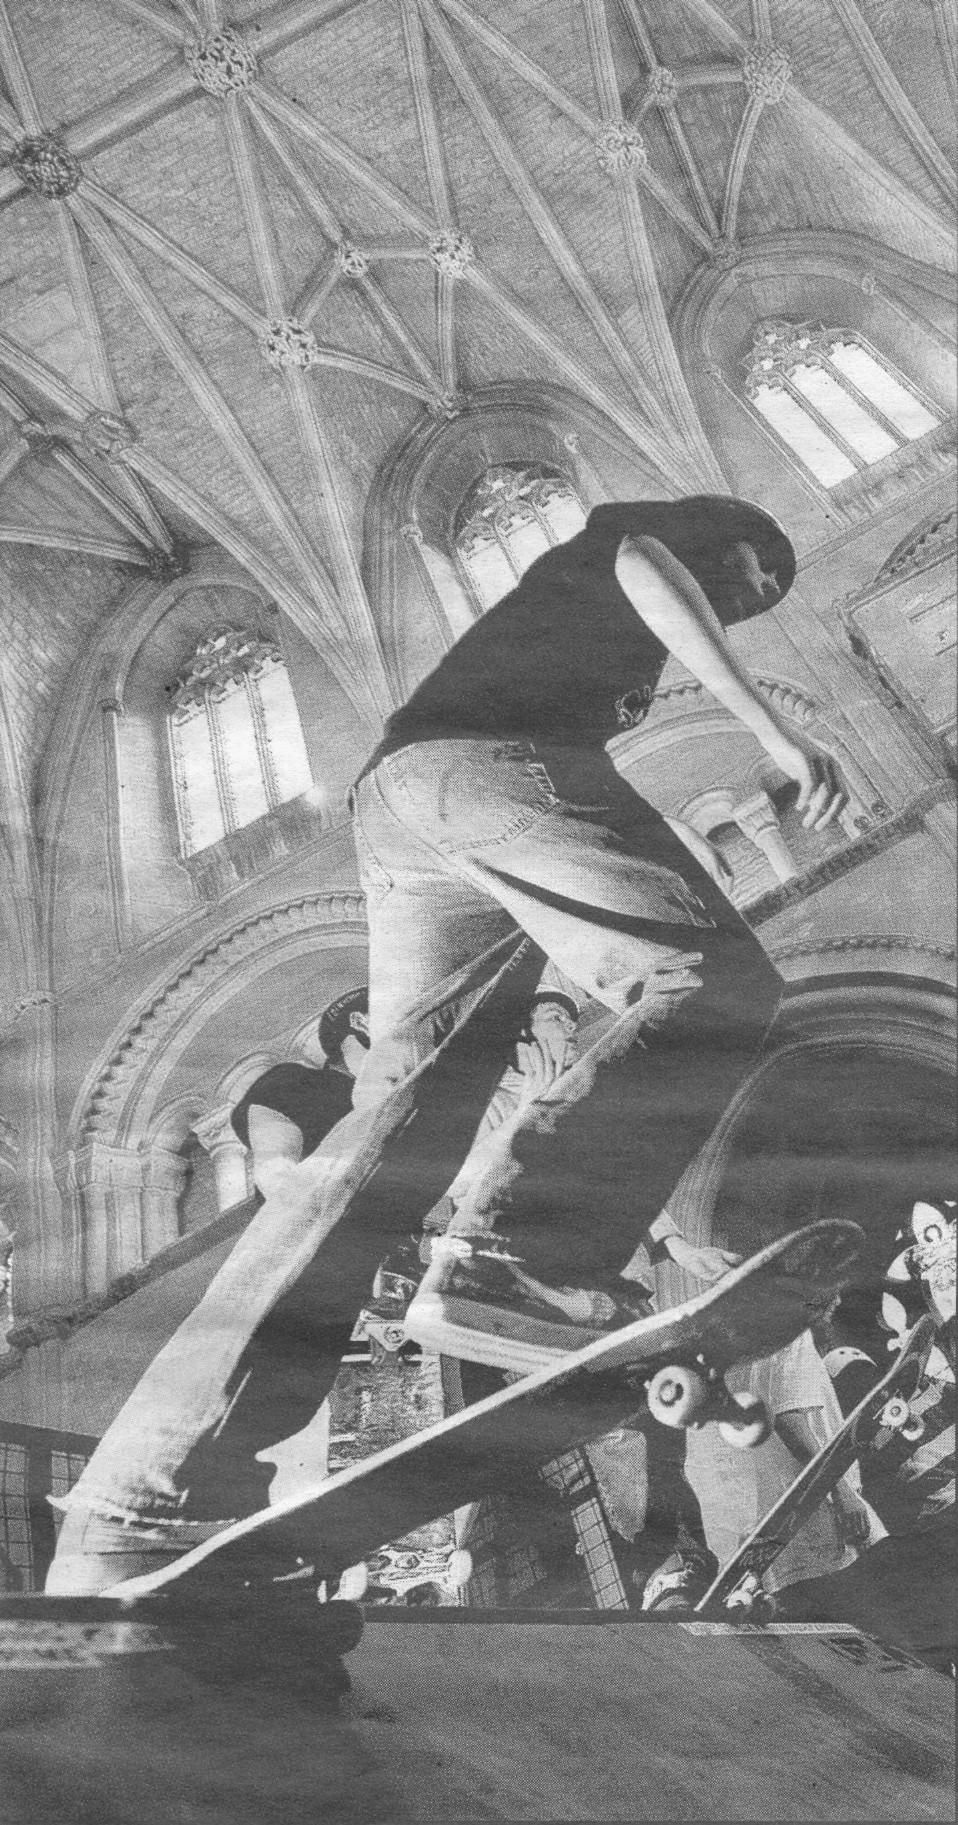 Religious Experience: People skating inside Malmesbury Abbey, Wiltshire, after it was transformed into an indoor skate park as part of a threeday youth event.